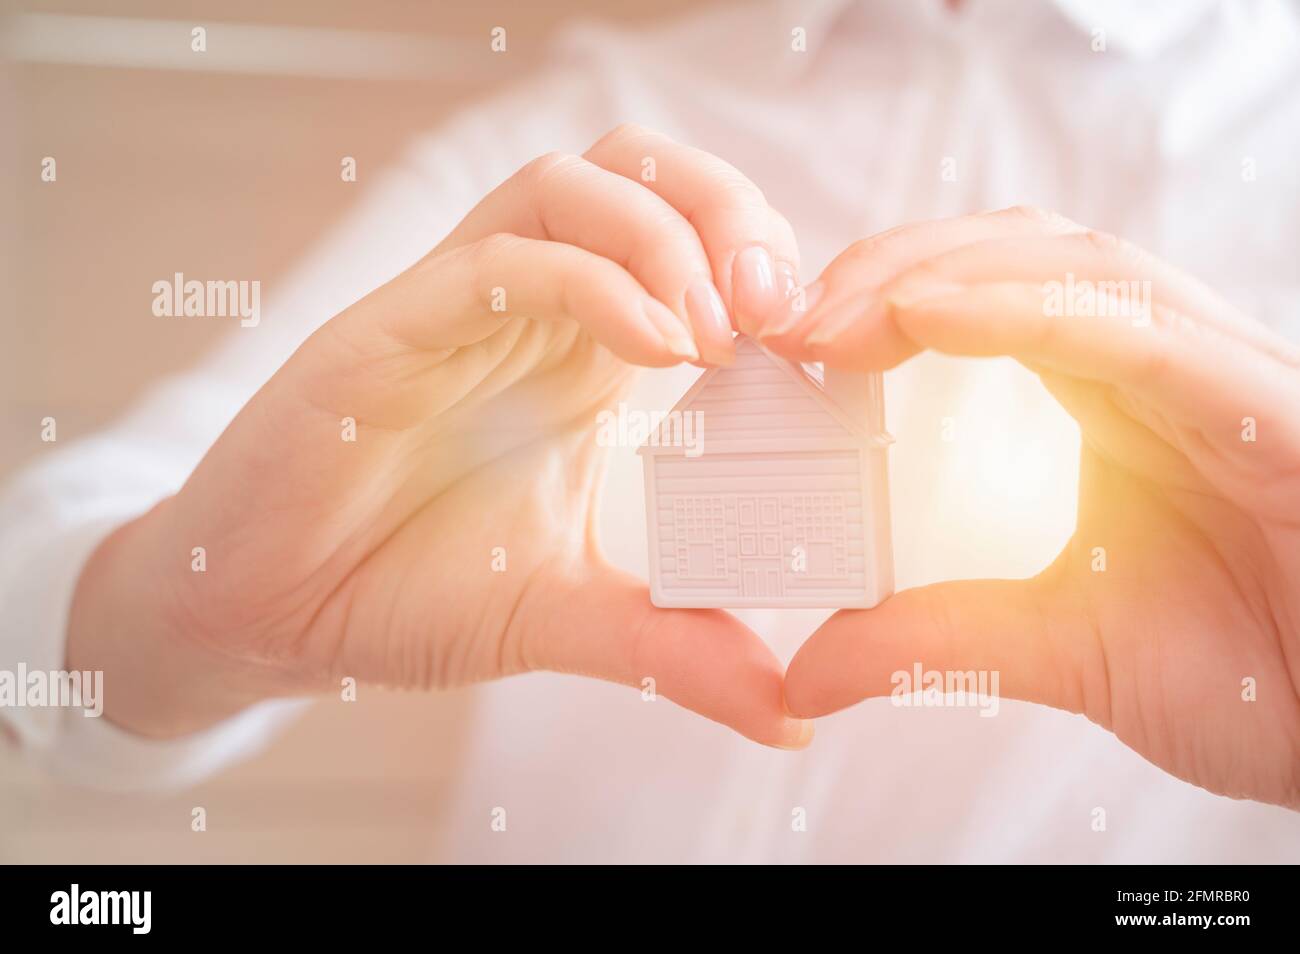 Hands holding miniature house. Housing and home protecting insurance concept, family house, home loan, home insurance, family life assurance Stock Photo